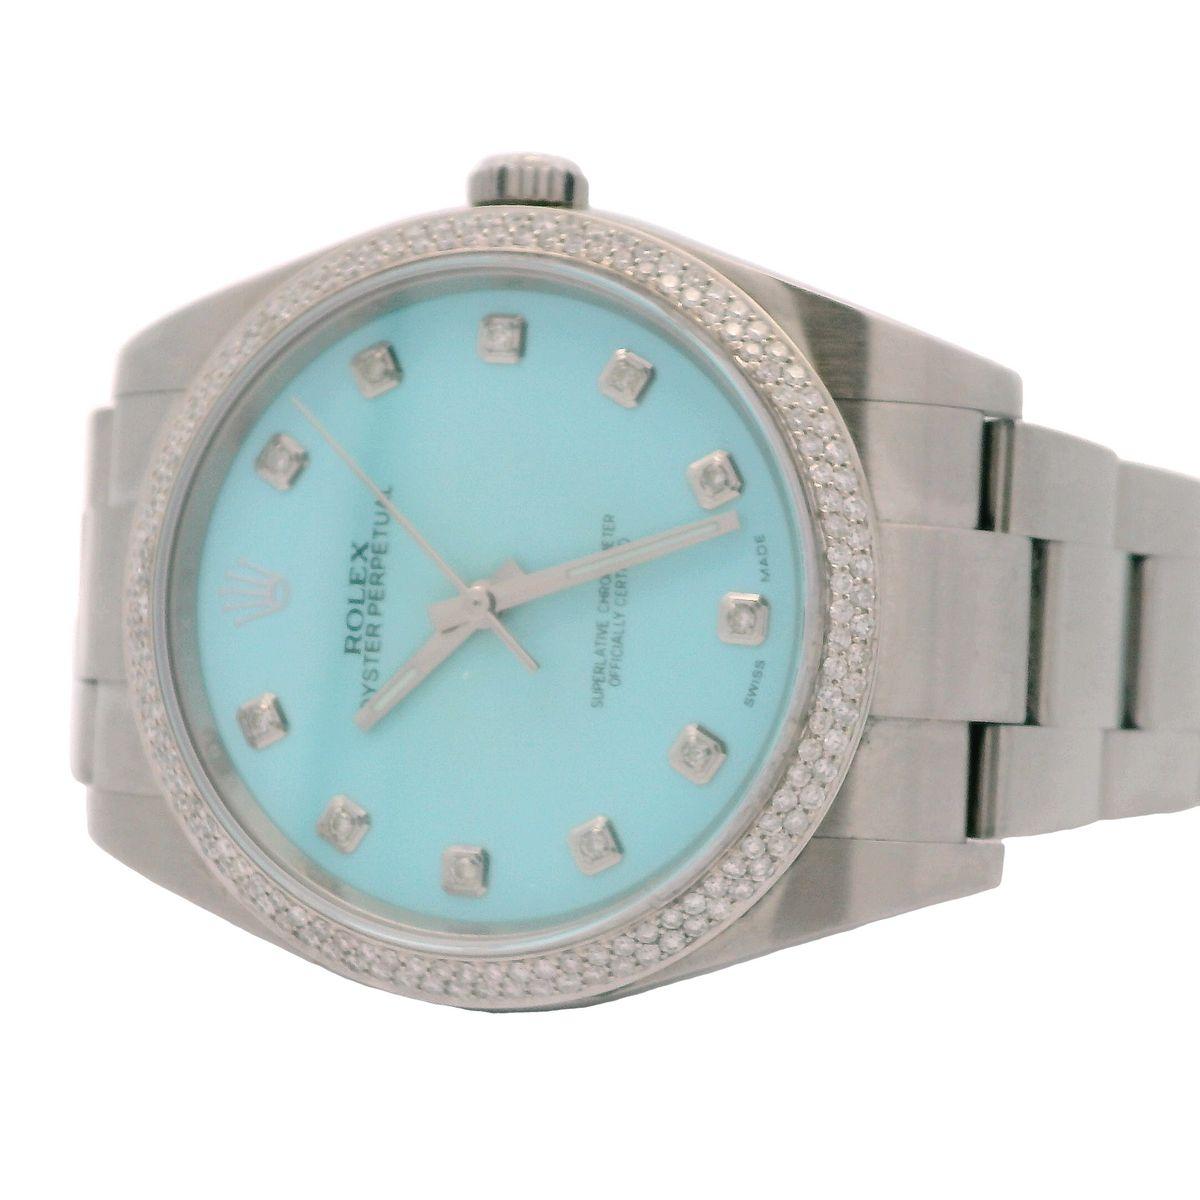 Rolex Oyster Perpetual stainless steel customized aftermarket turquoise colored diamond dial and diamond bezel offered by Alex & Co. This stunning timepiece is pre-owned in excellent condition and features a custom Tiffany style dial with diamond